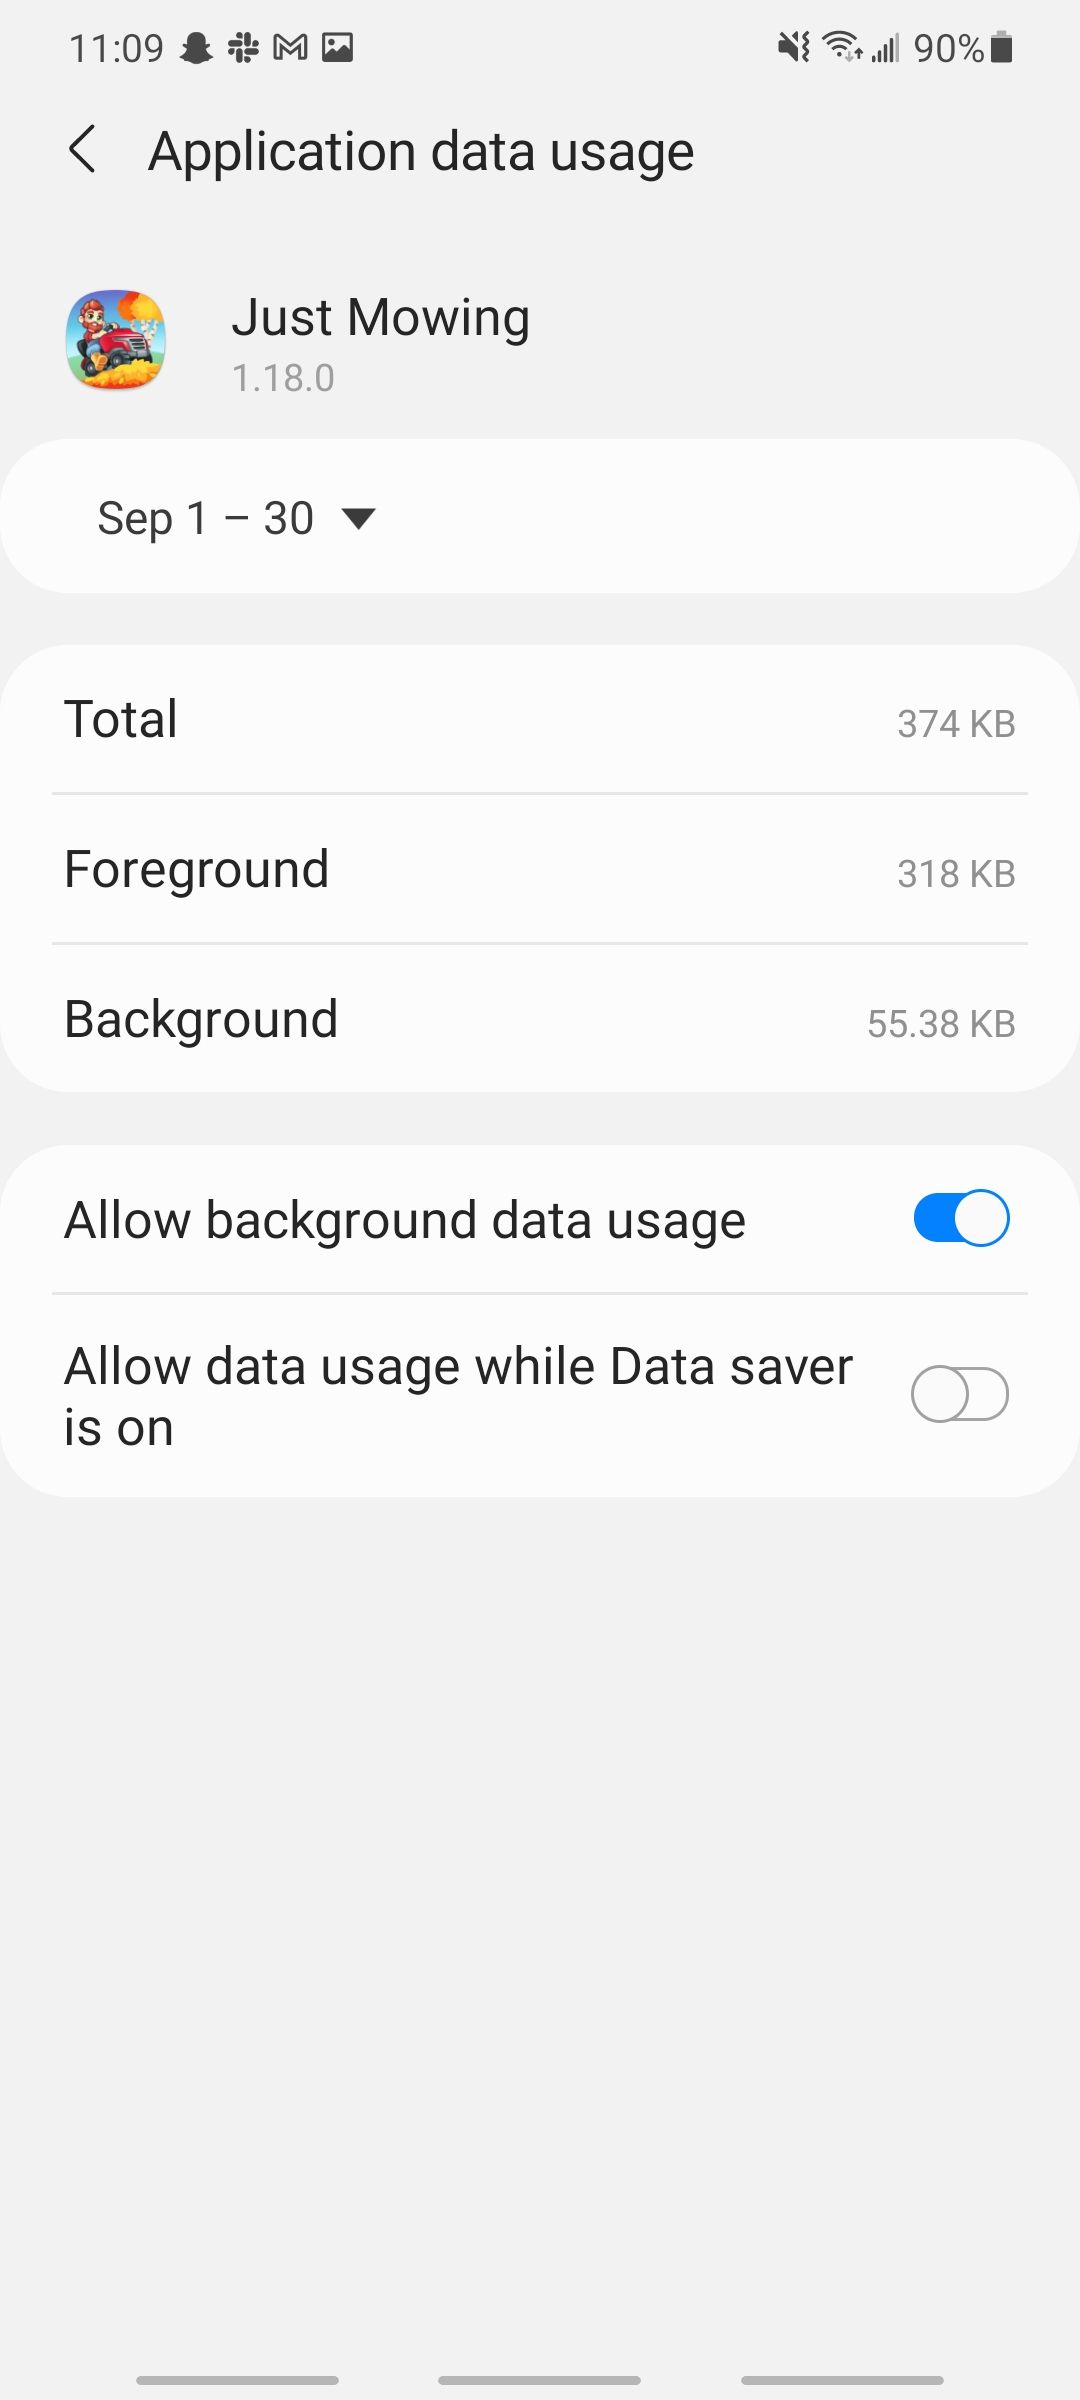 application background data usage of just mowing game